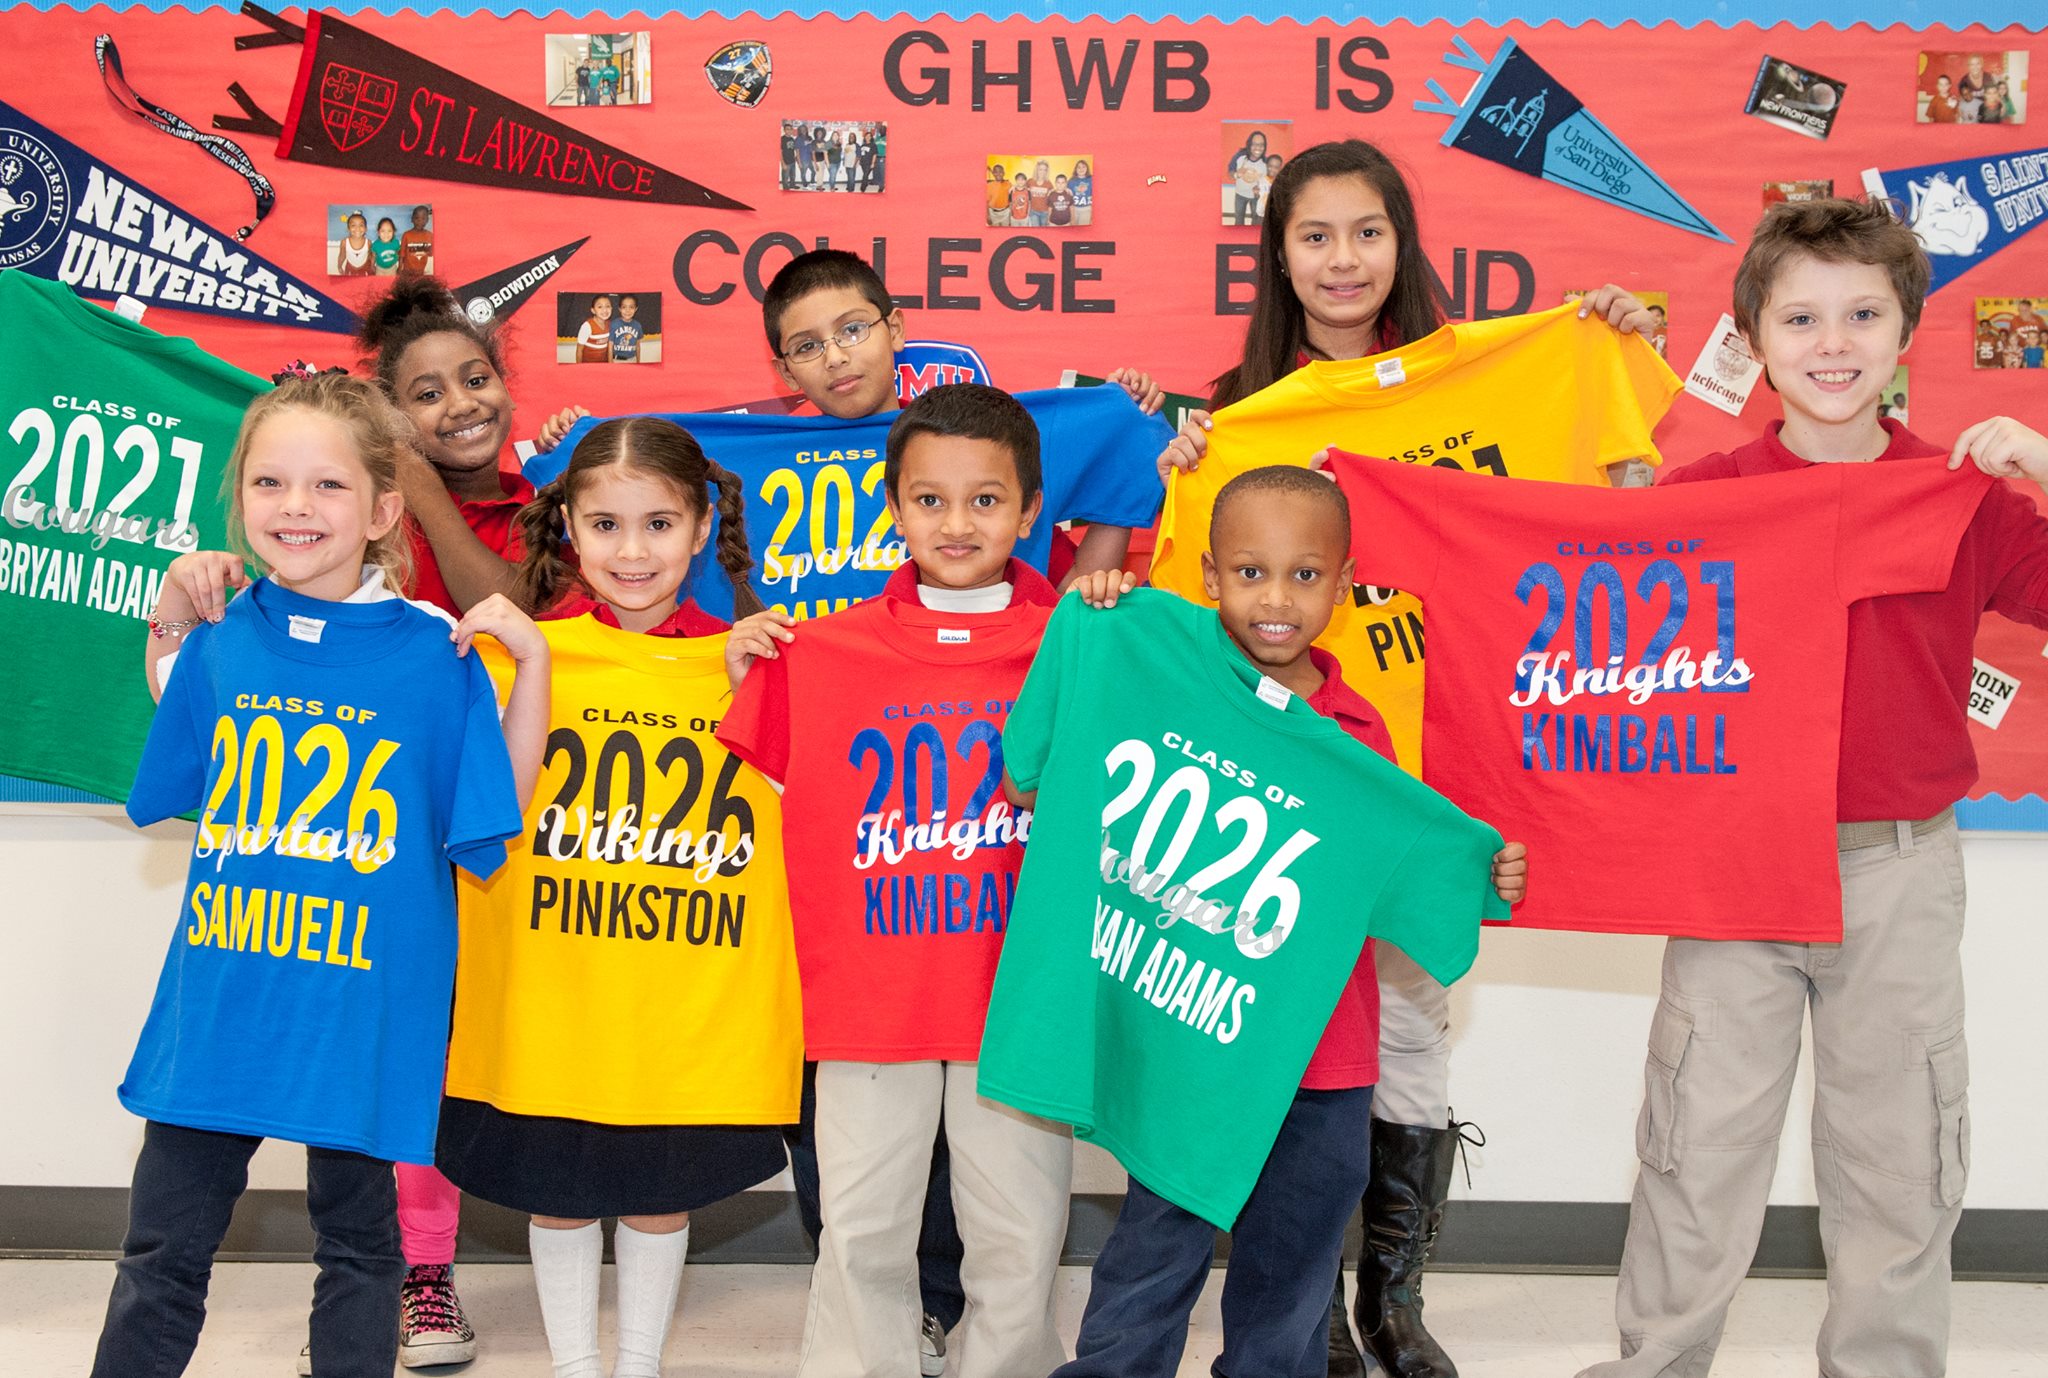 Elementary students at campuses across DISD are given senior shirts as part of the I Will Graduate program.